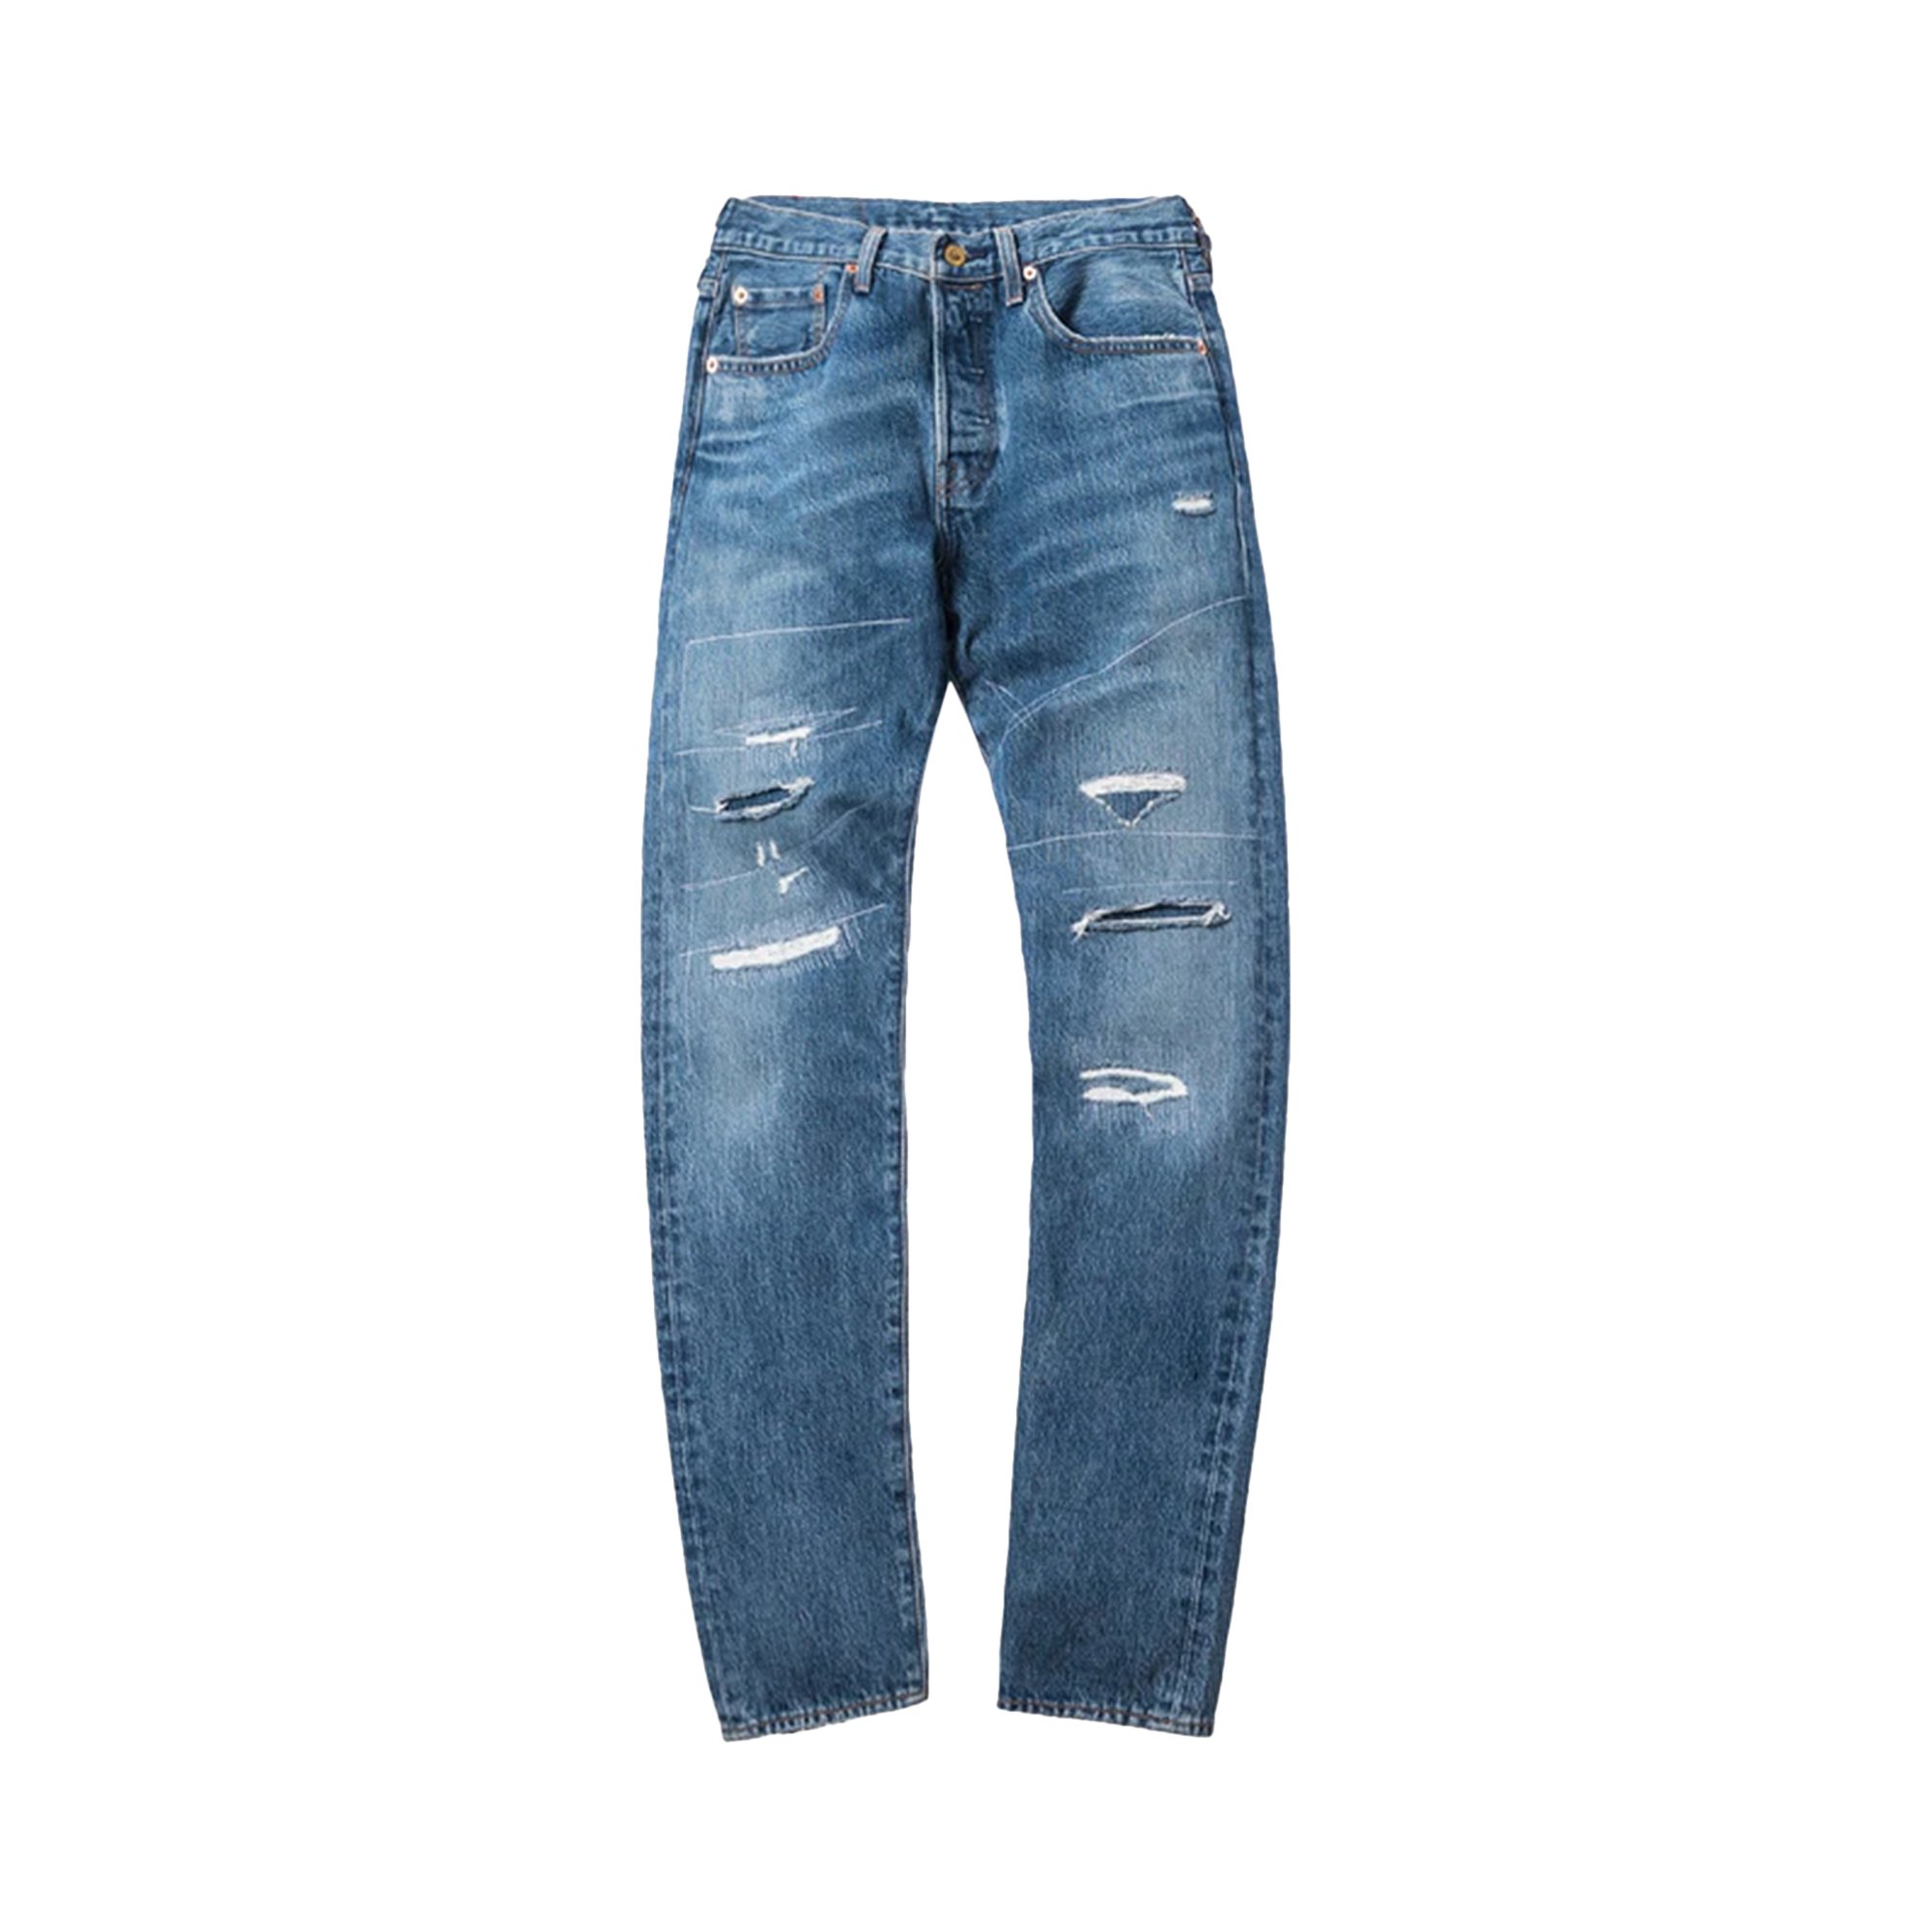 Джинсы Kith For Levis Strawberry Fields 501, цвет Washed Blue